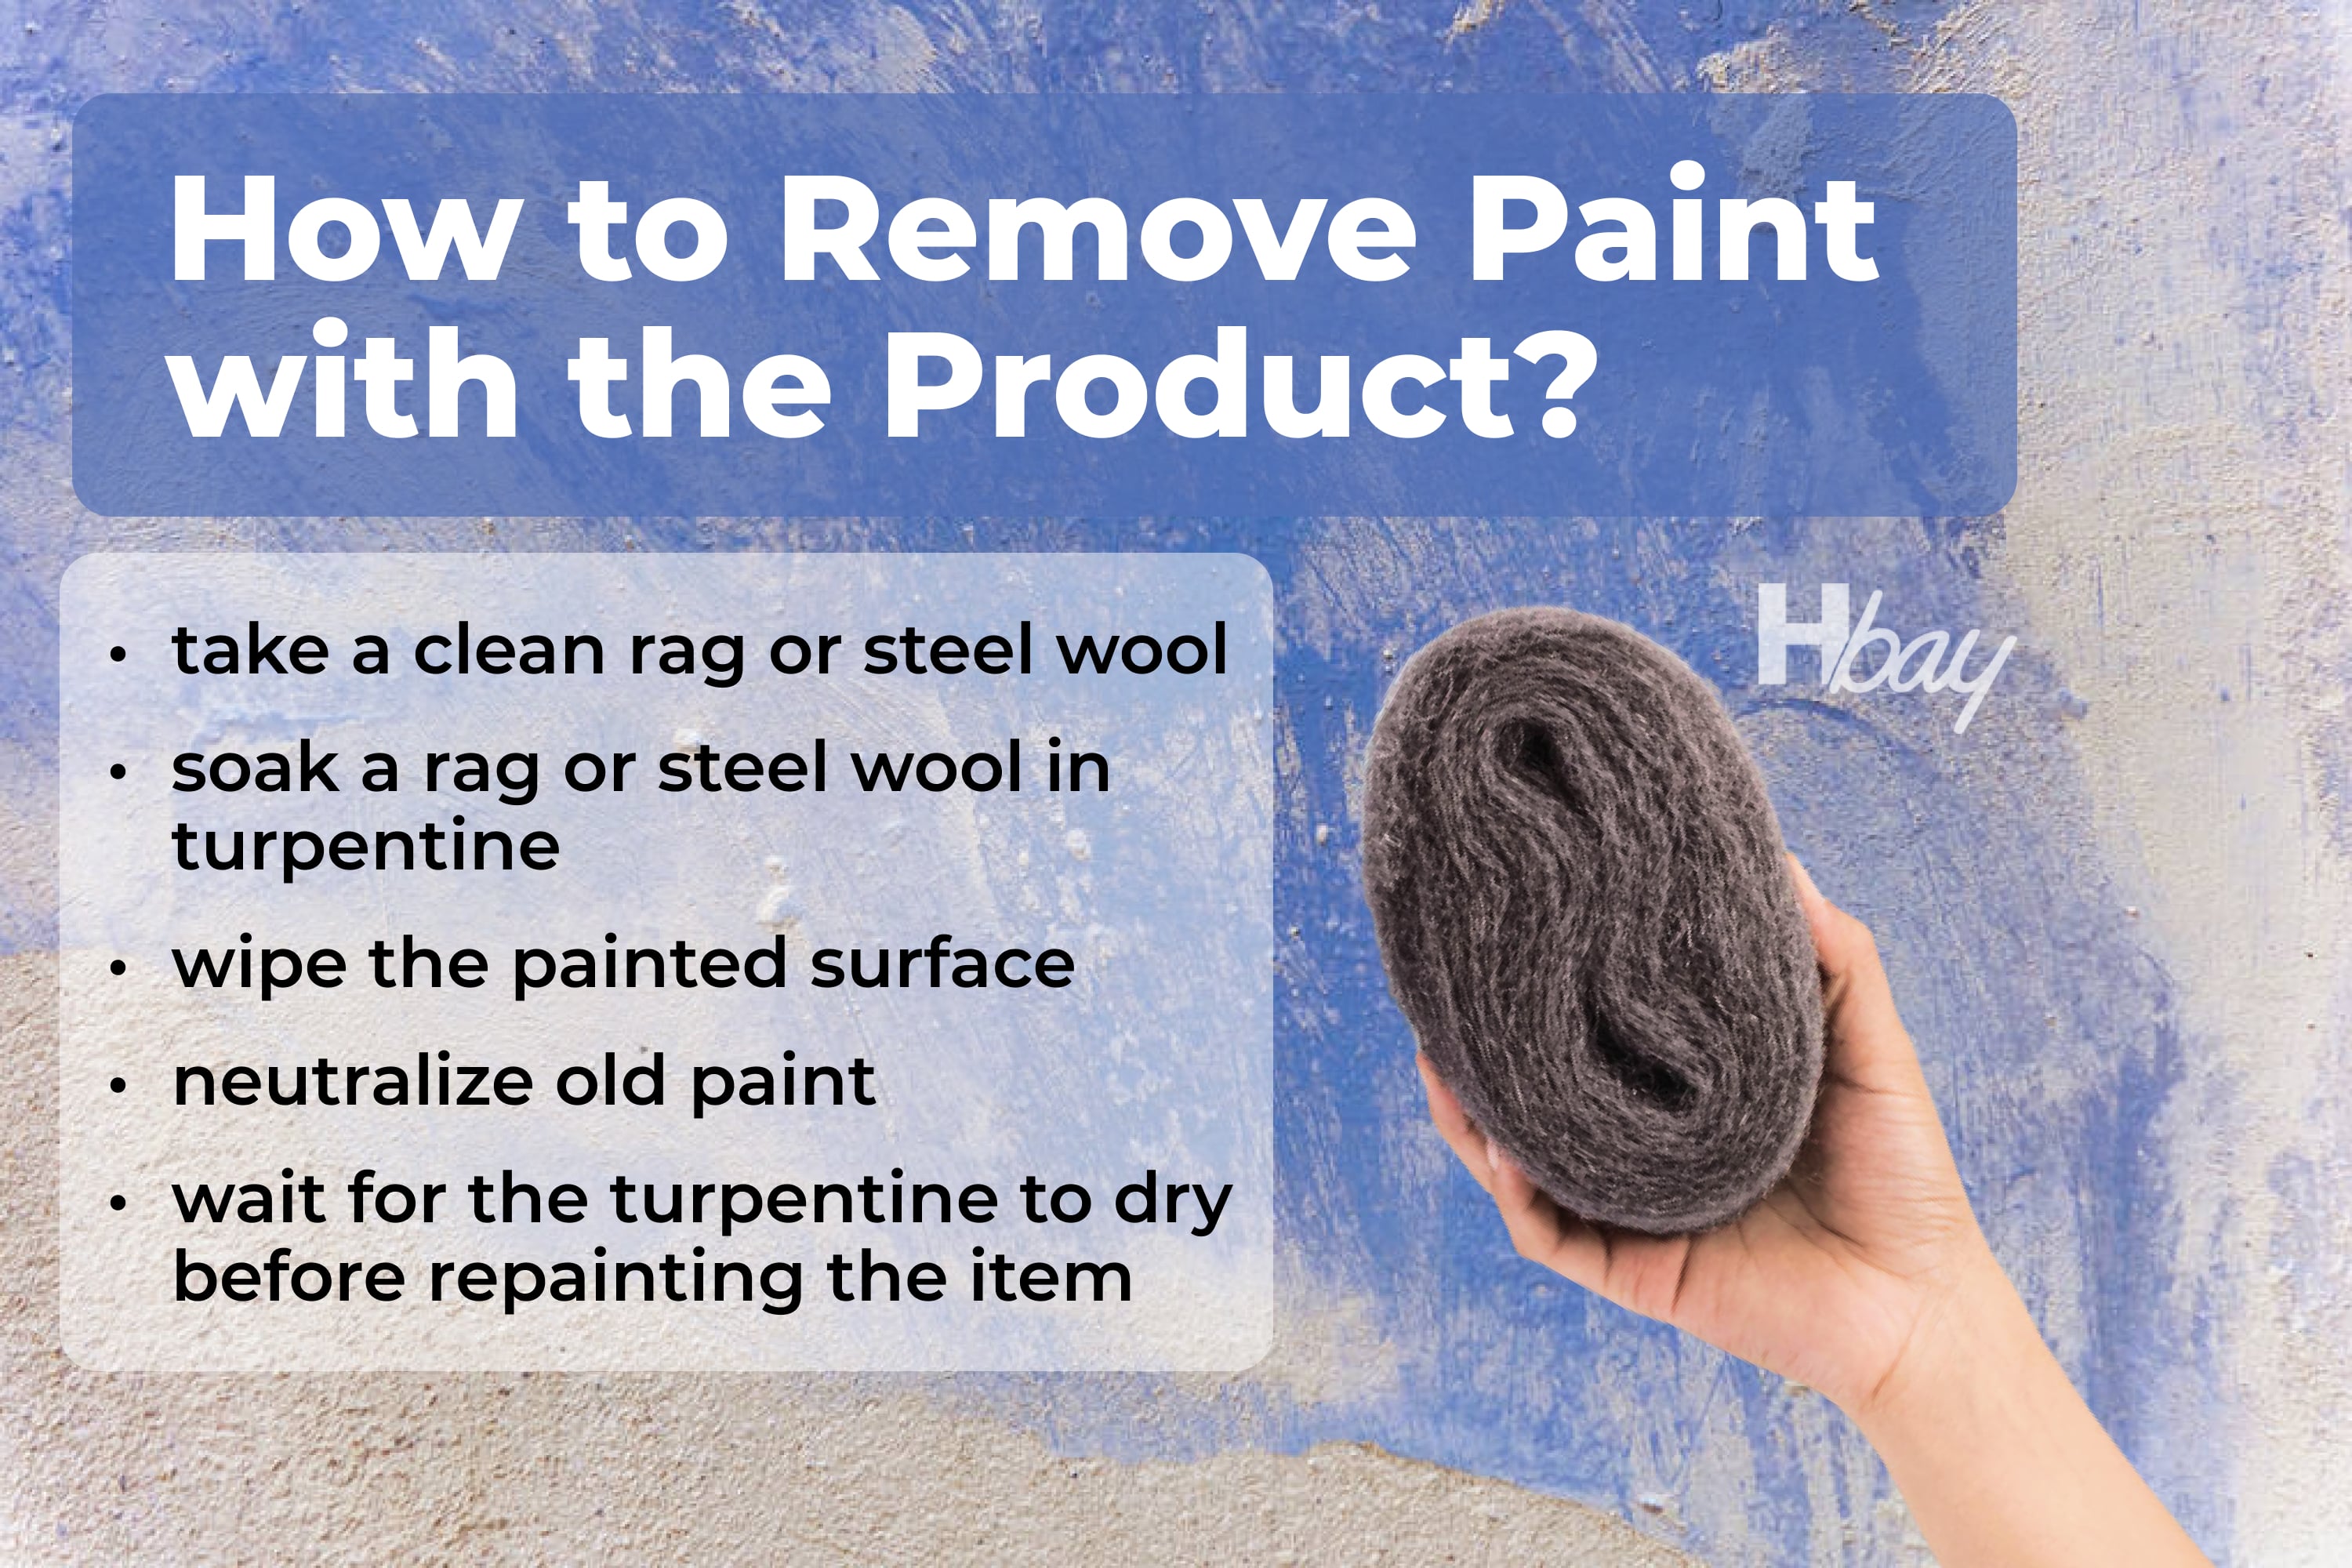 Apply the Product.How to remove paint with the product